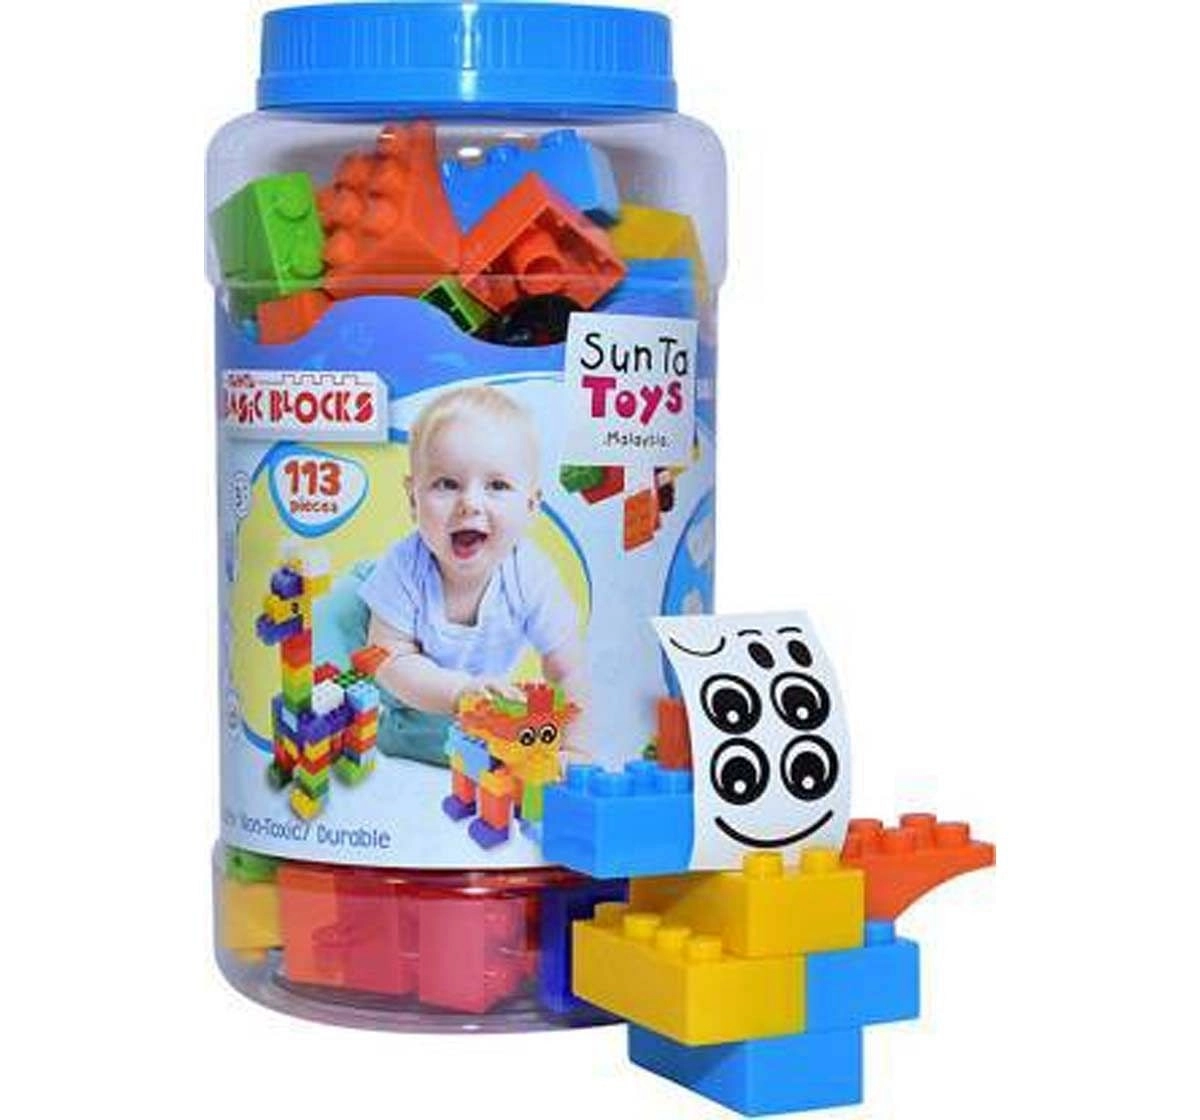 Sunta Jumbo 113 Blocks In Container Baby Gear for Kids age 3Y+ 